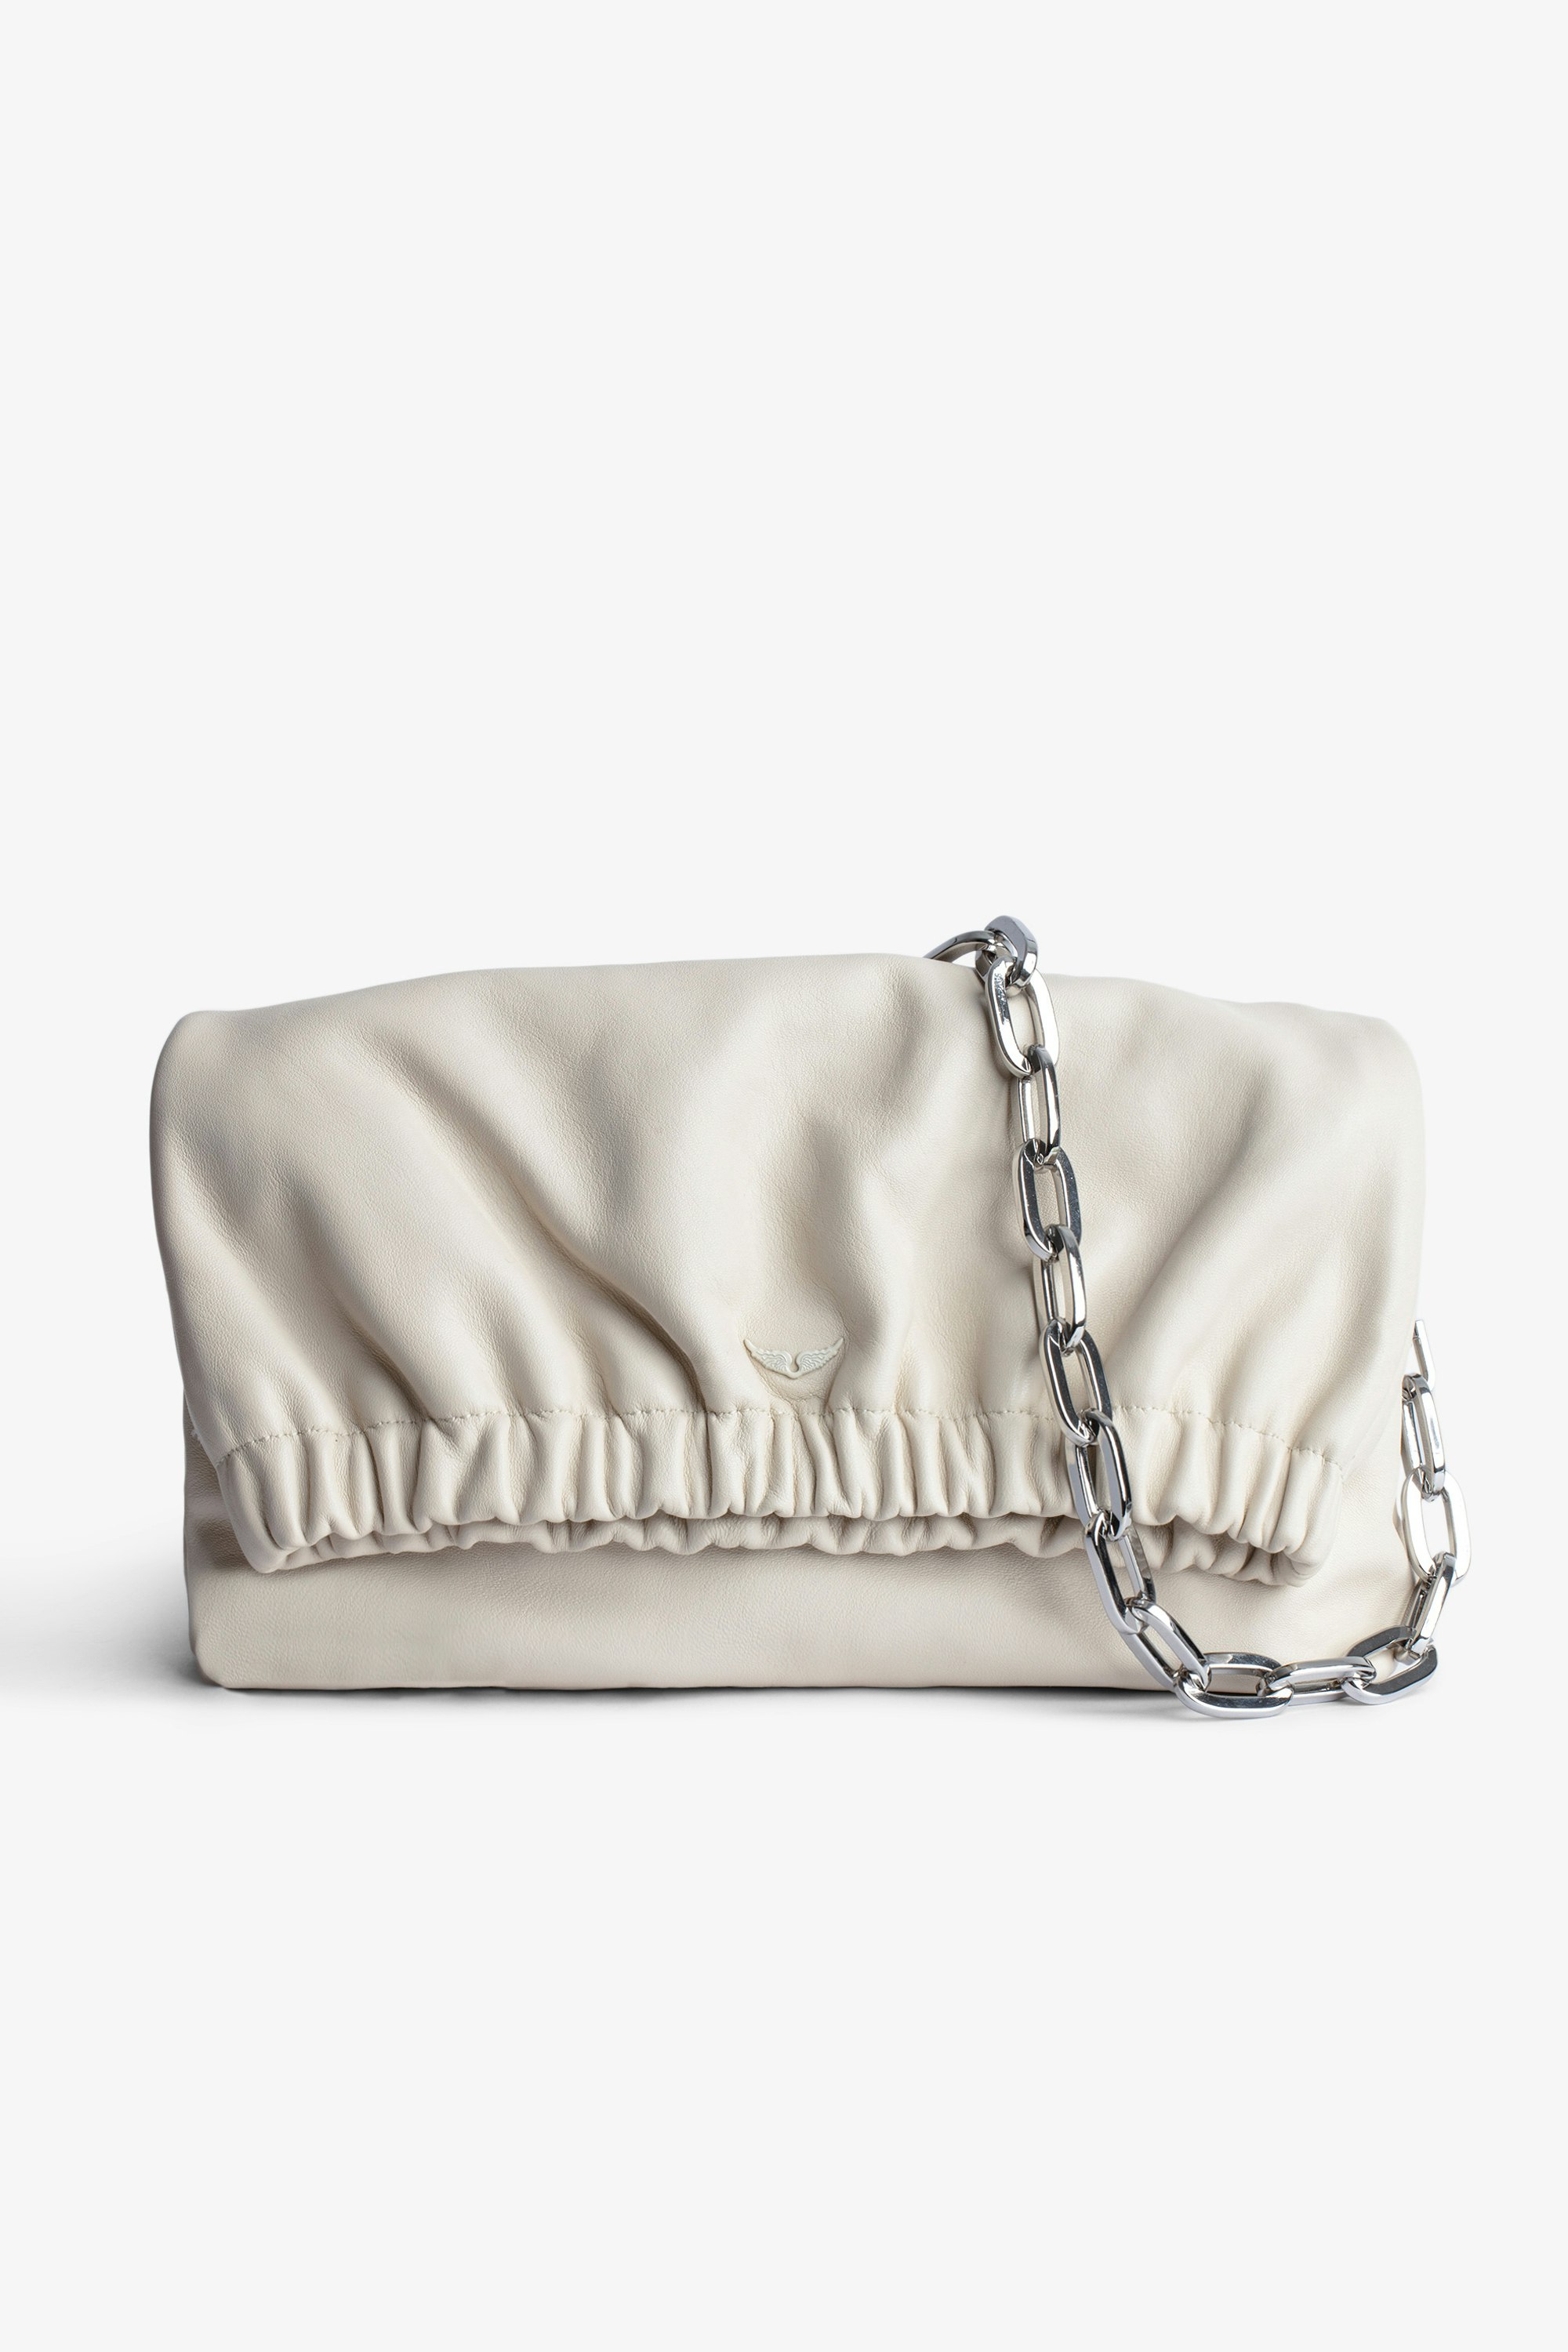 Rockyssime バッグ Women’s smooth ecru leather gathered clutch purse with gold chain